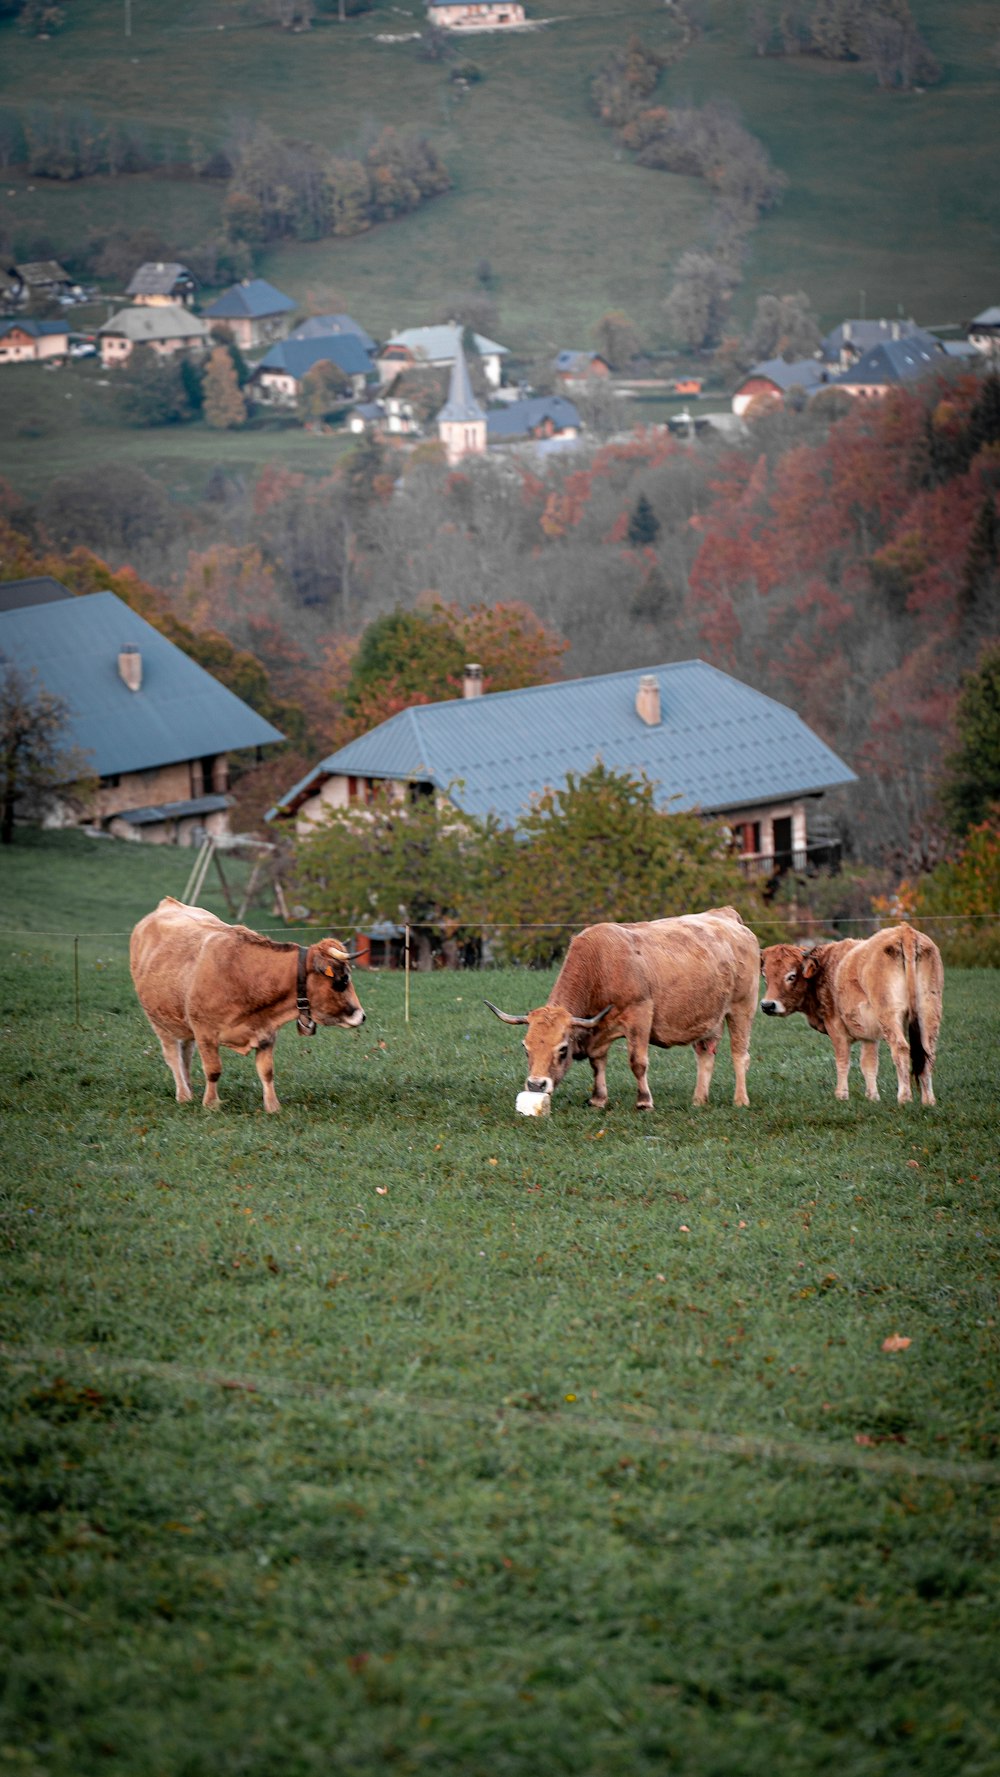 a group of cows stand in a grassy field